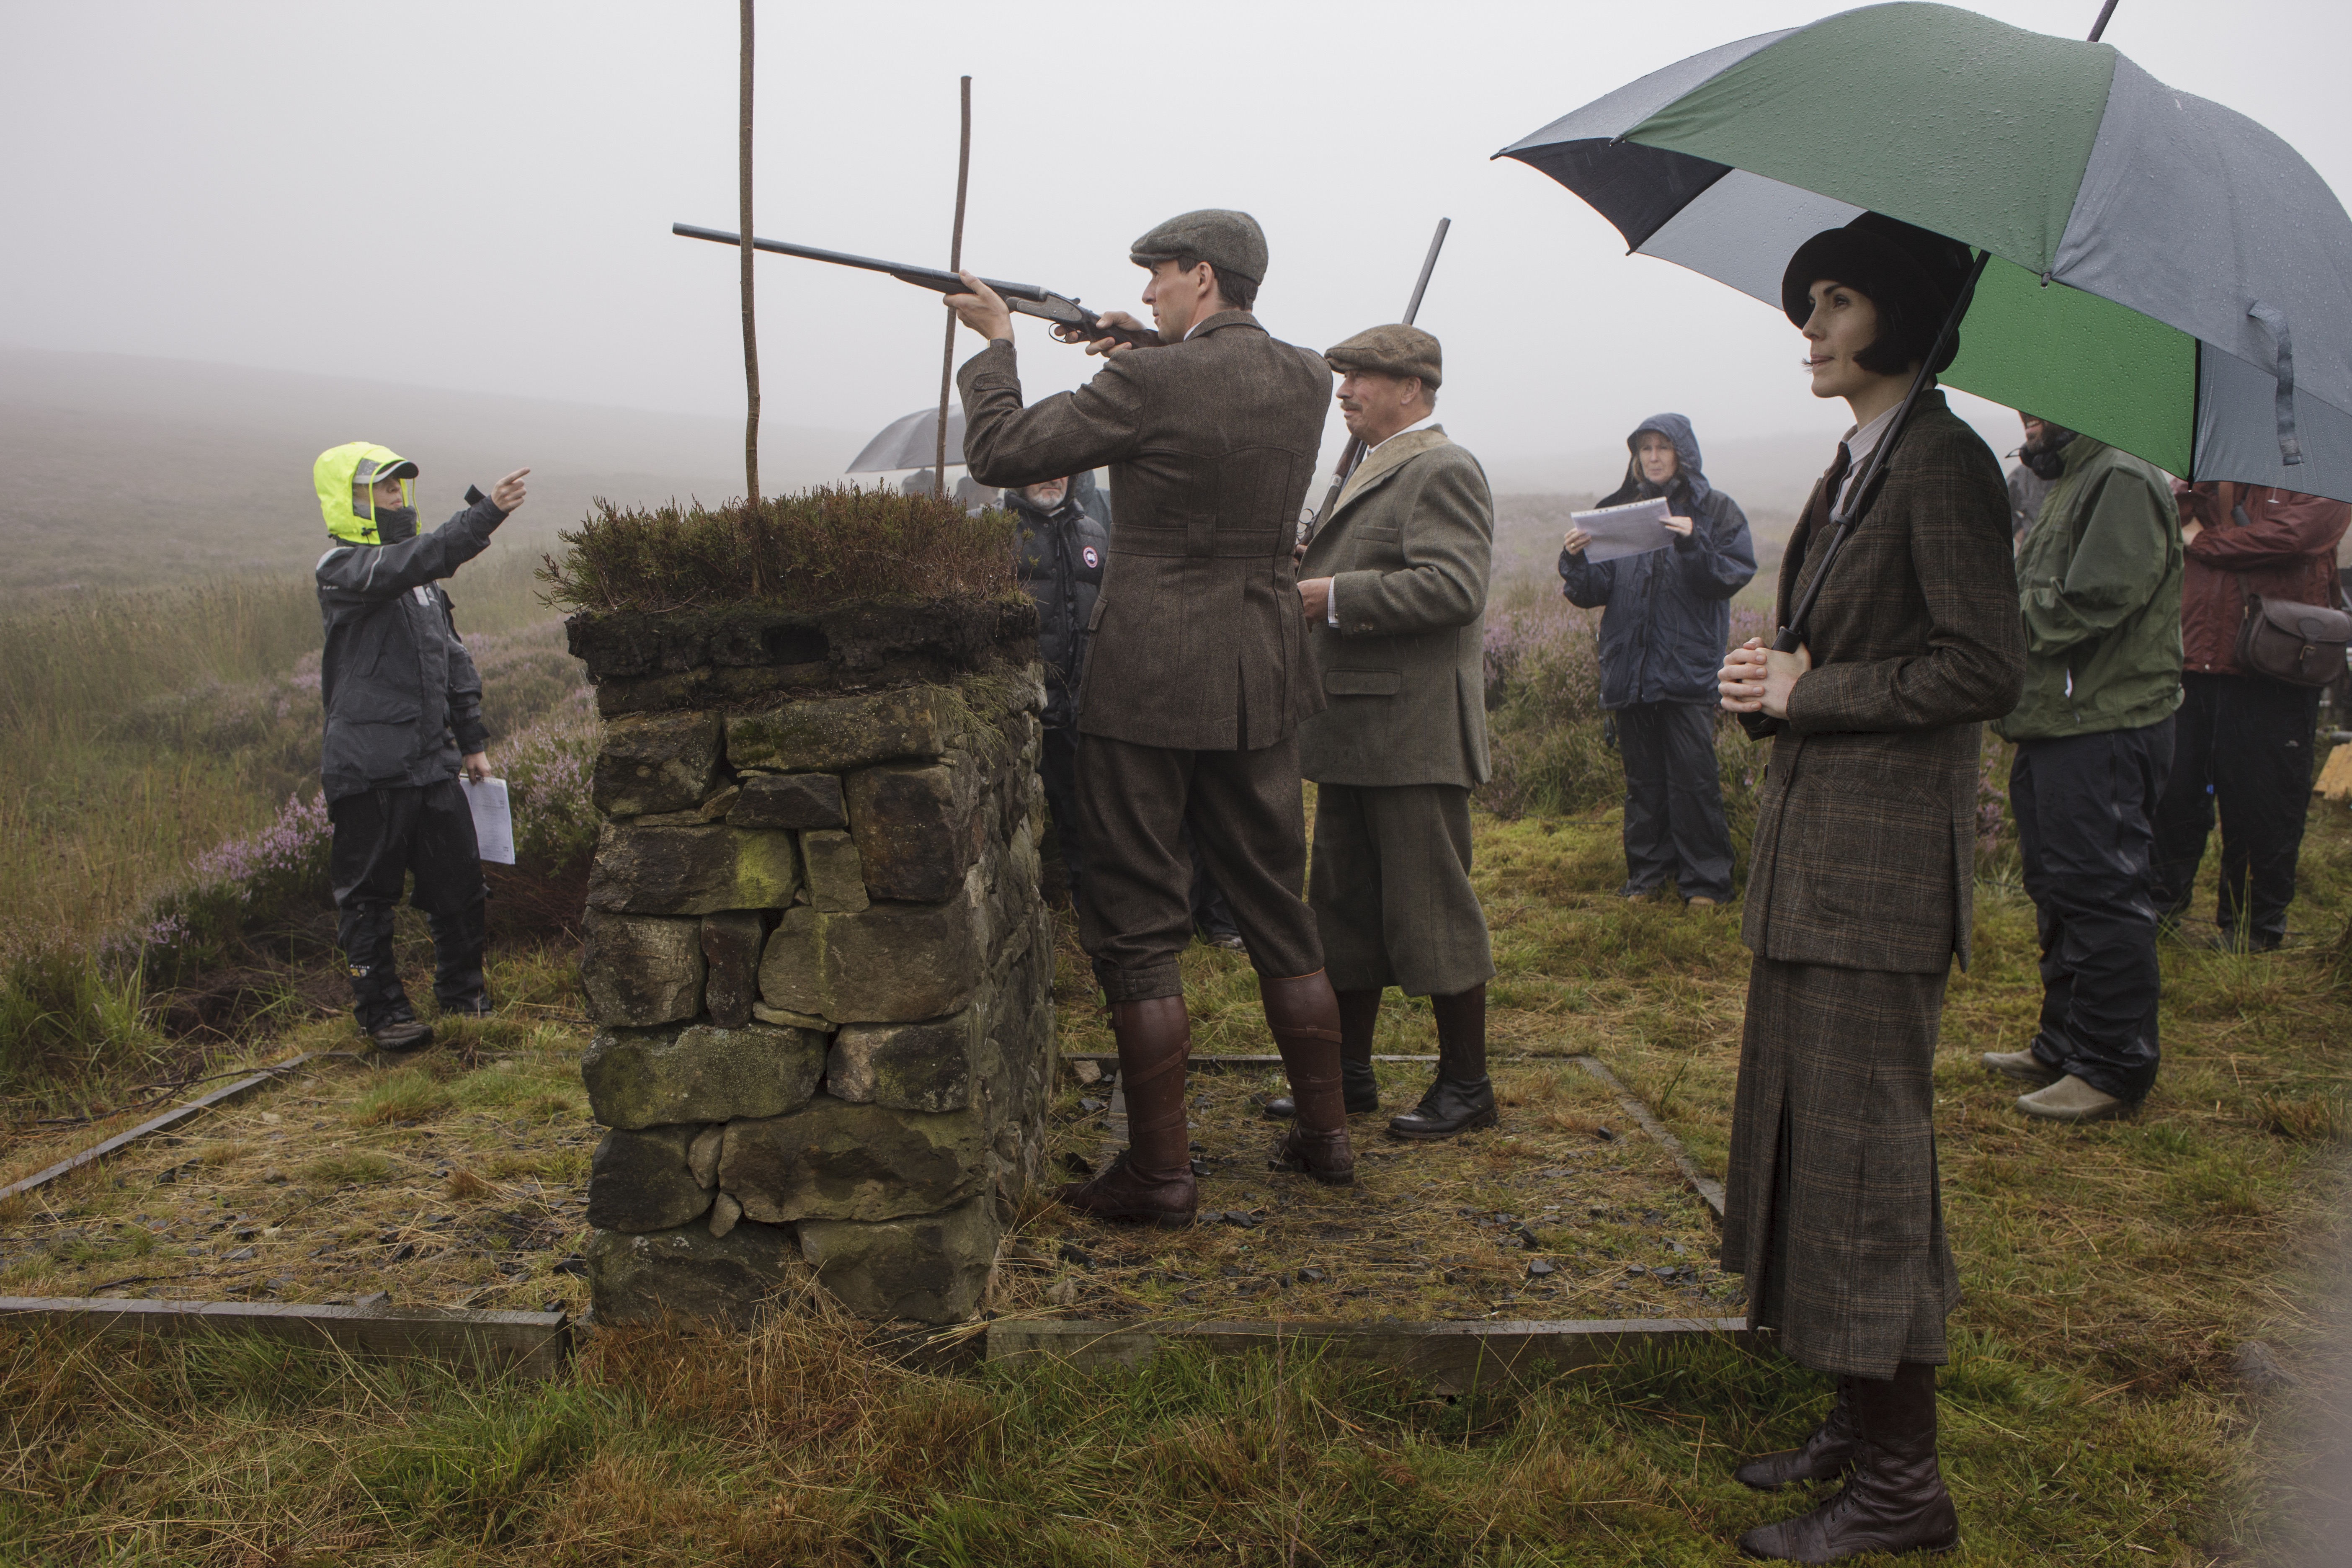 Minkie Spiro on set Downton at Alnick Castle Moors with Michelle Dockery and Matthew Goode